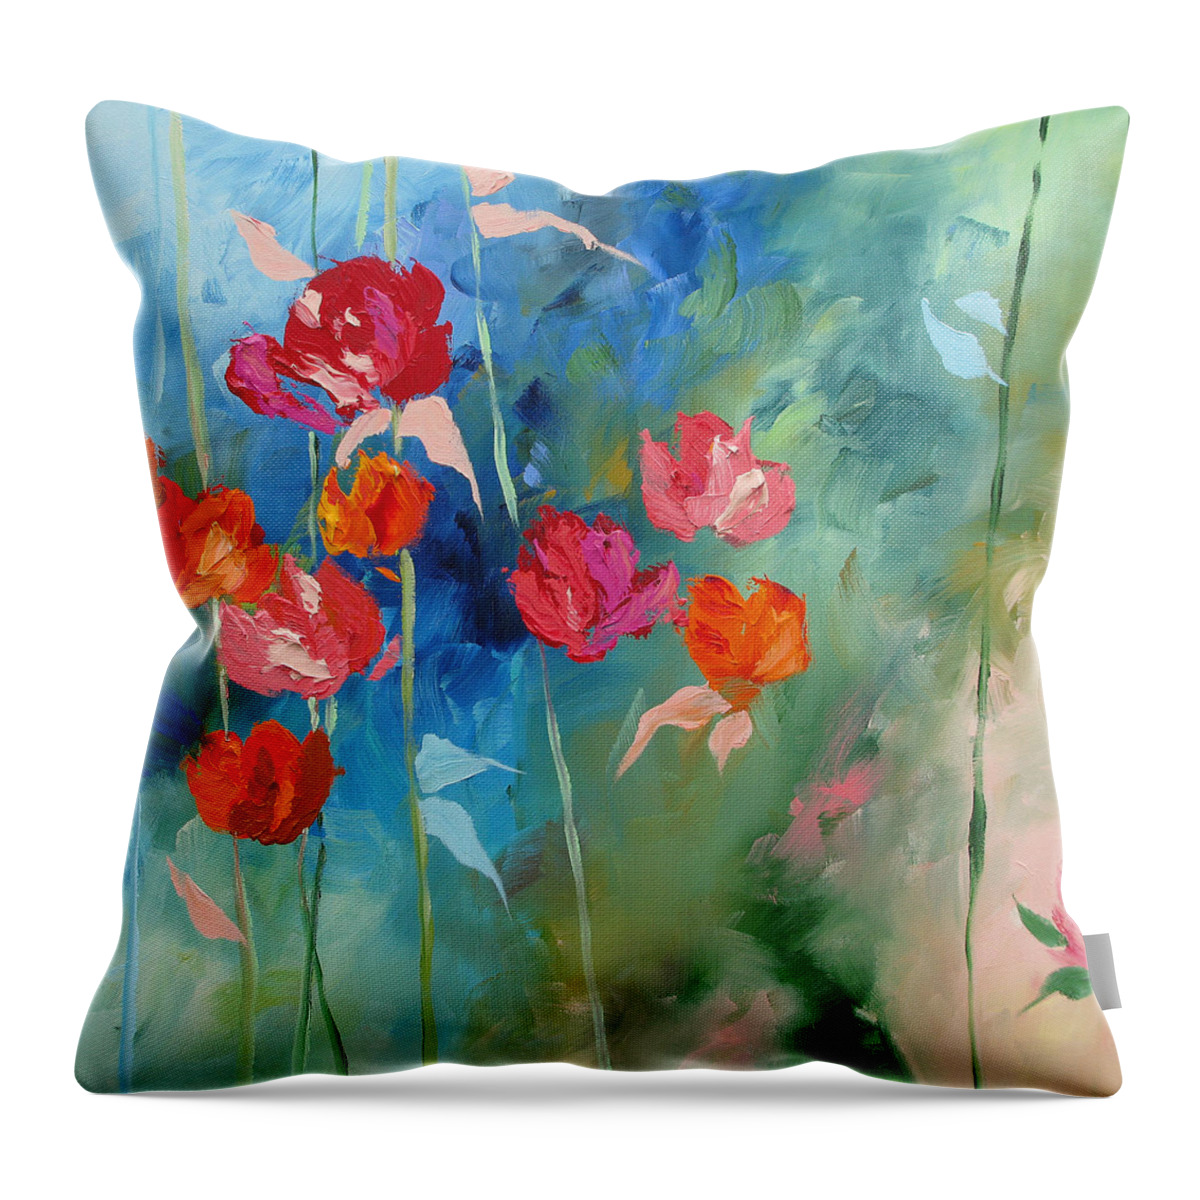 Art Throw Pillow featuring the painting Bliss by Linda Monfort